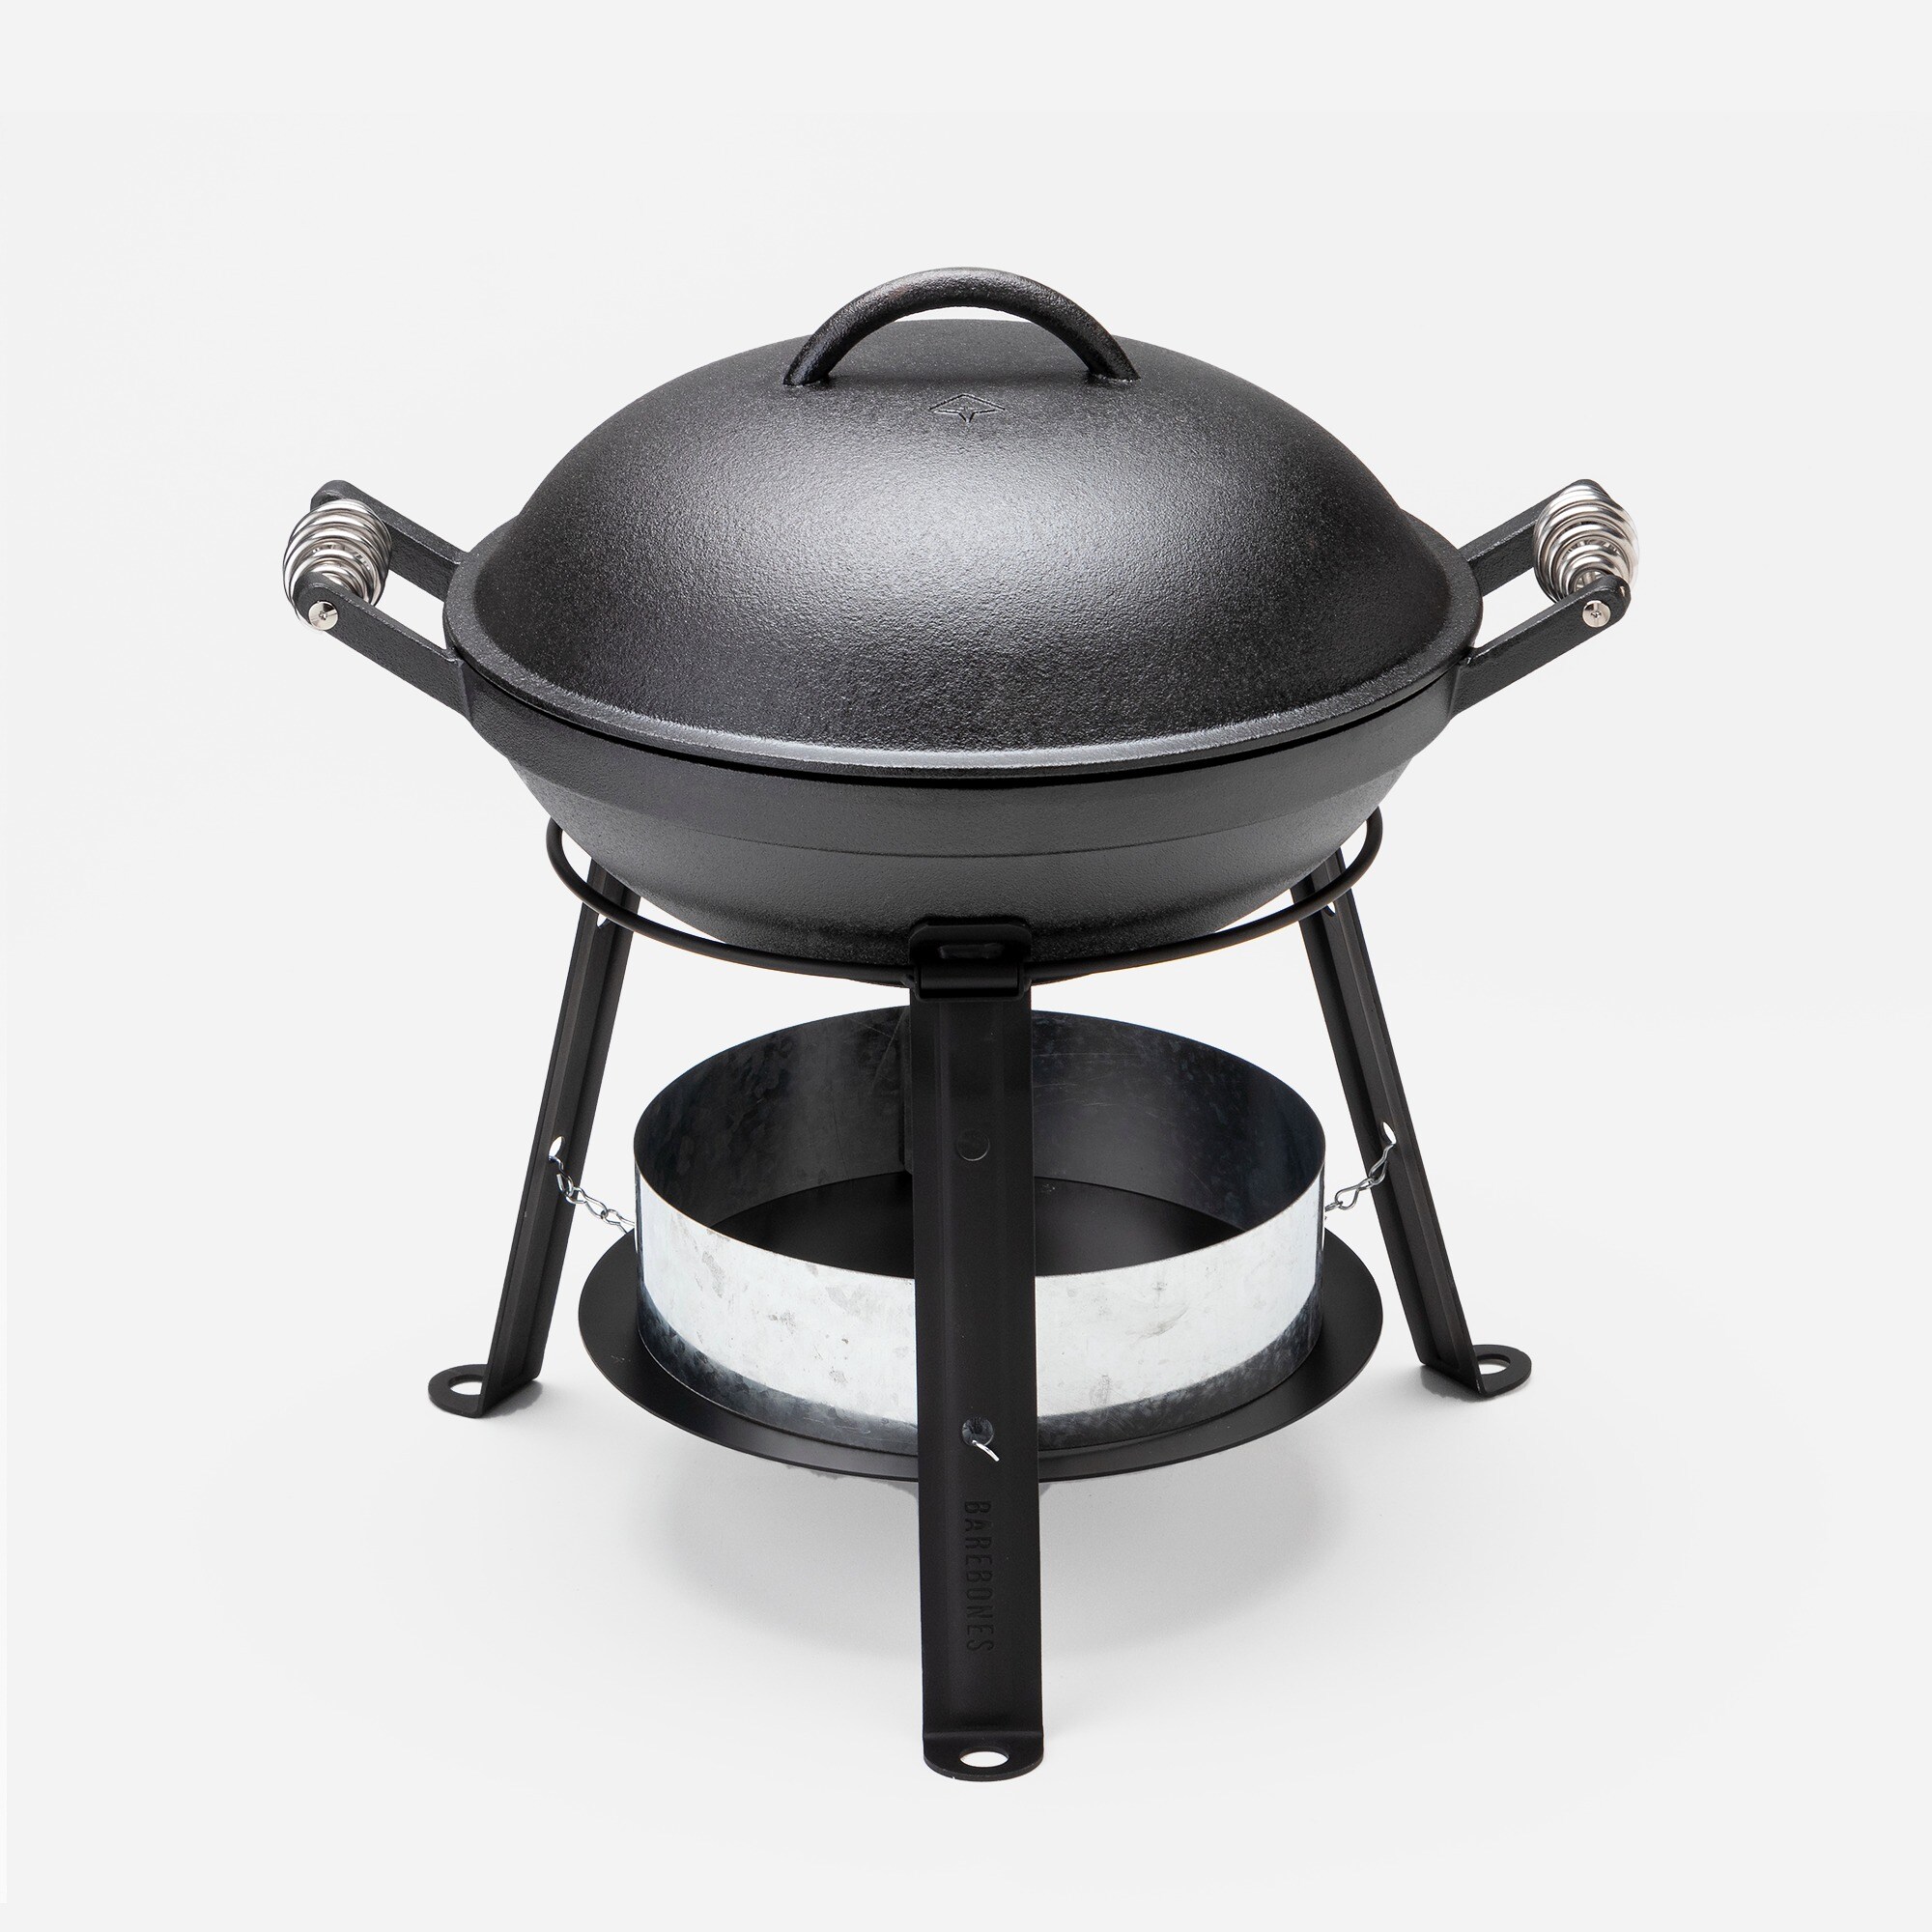 homes Barebones all-in-one cast-iron grill